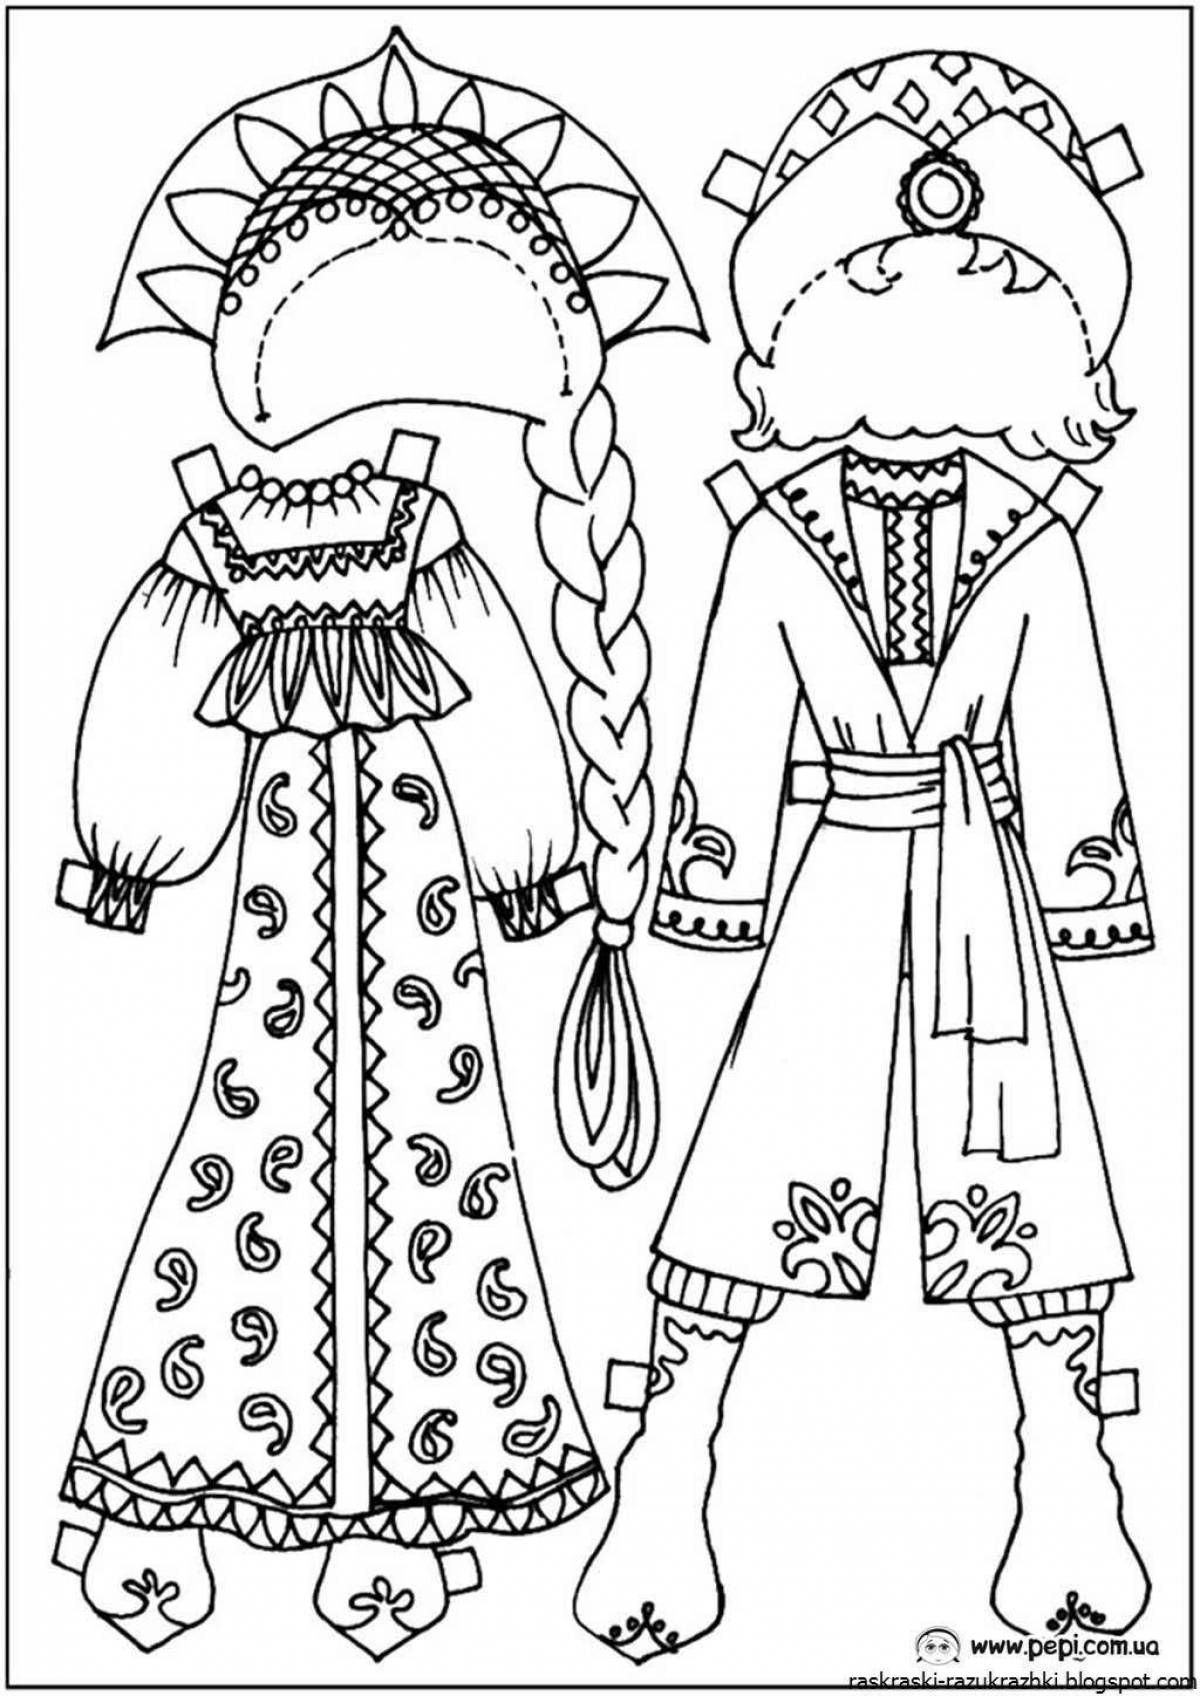 Coloring page exquisite Russian folk costume